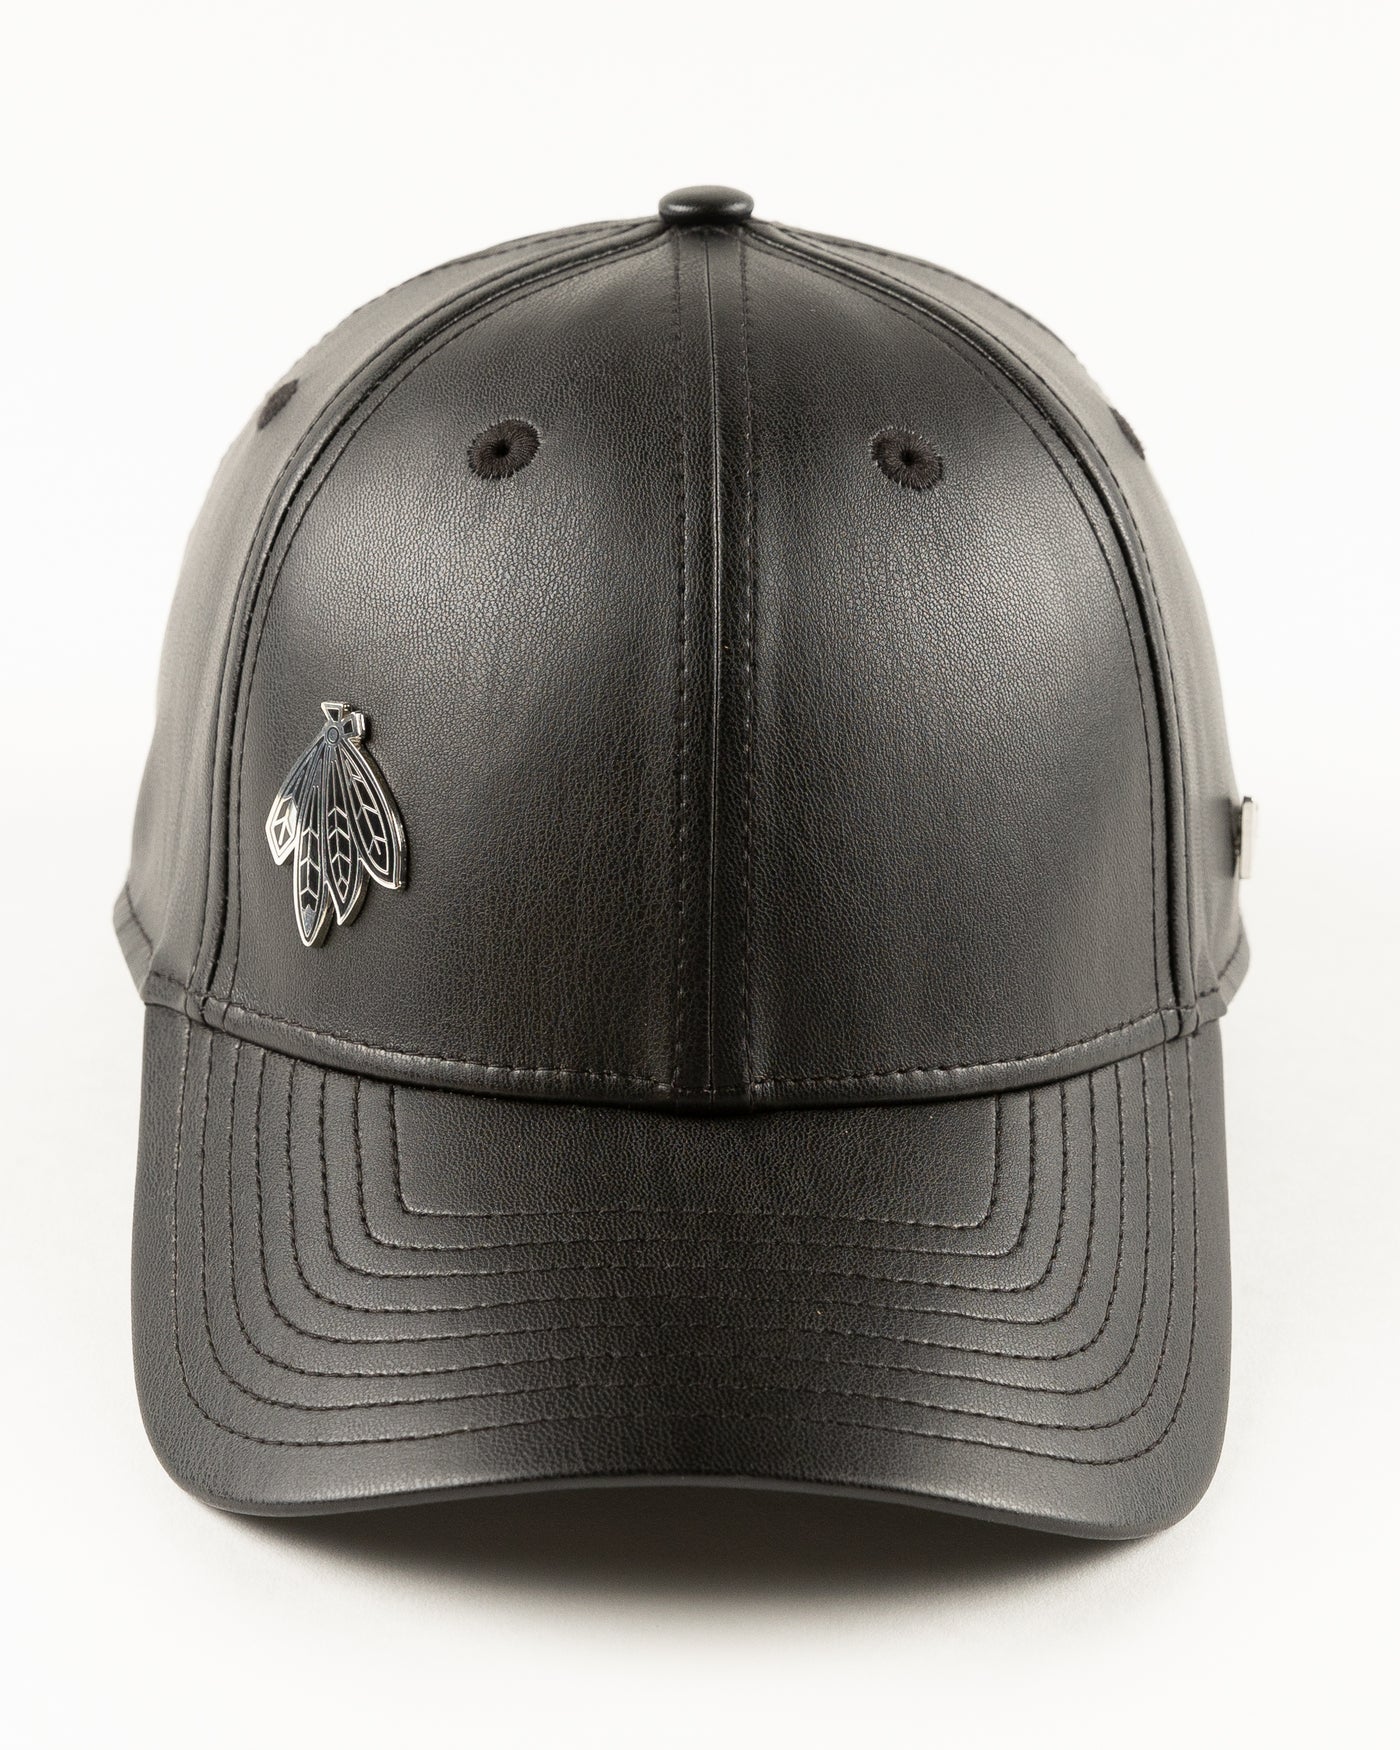 black leather New Era cap with Chicago Blackhawks four feathers logo in silver pin on front - front lay flat